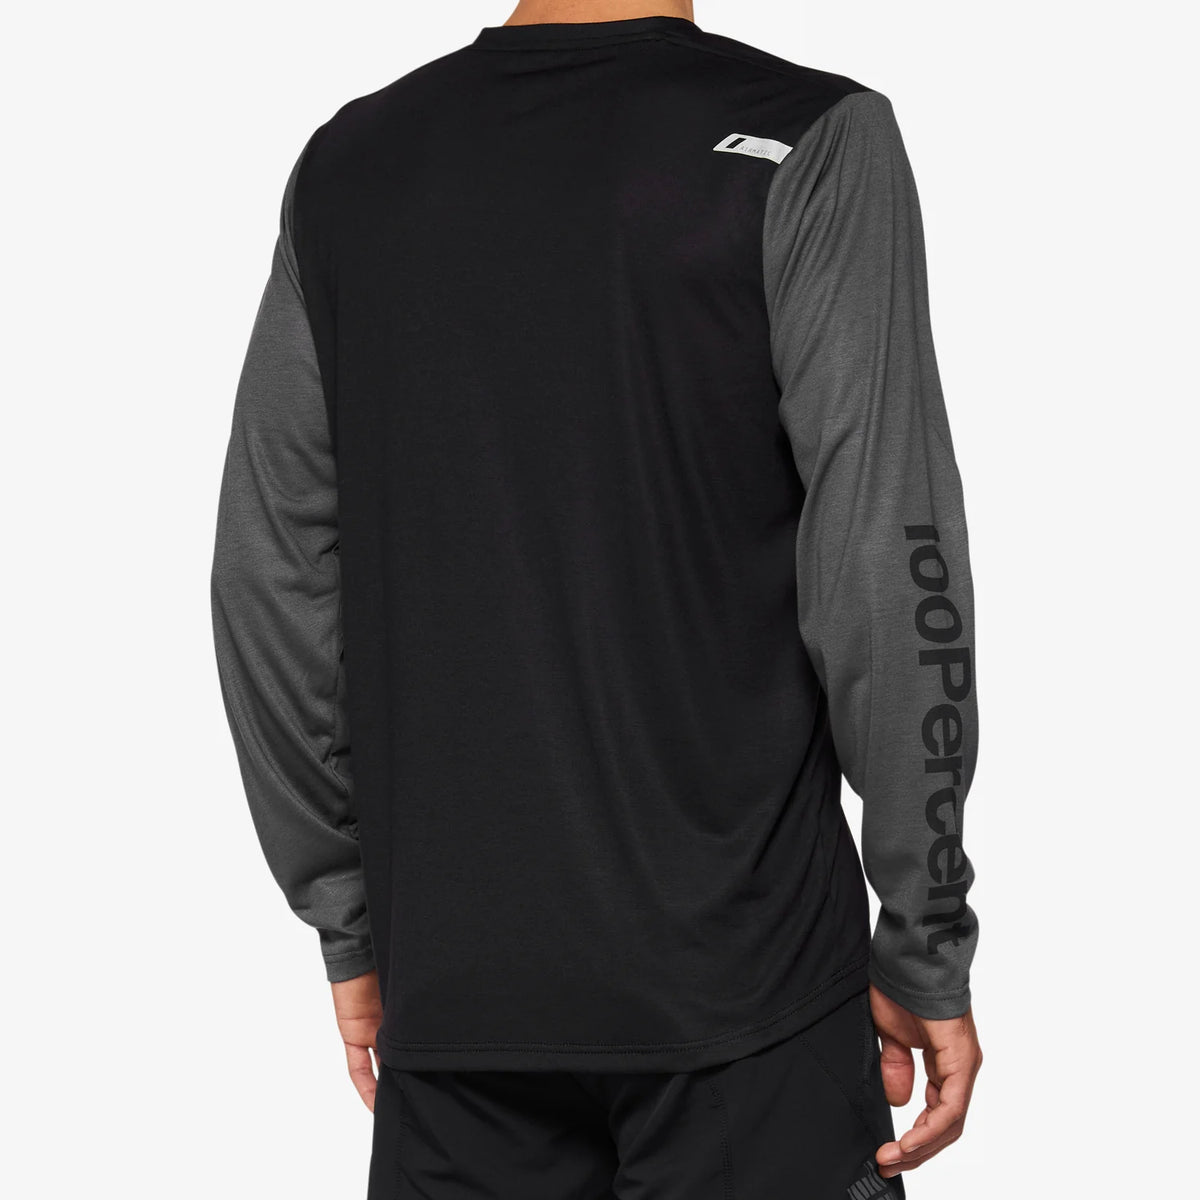 Long sleeve jersey 100% airmatic